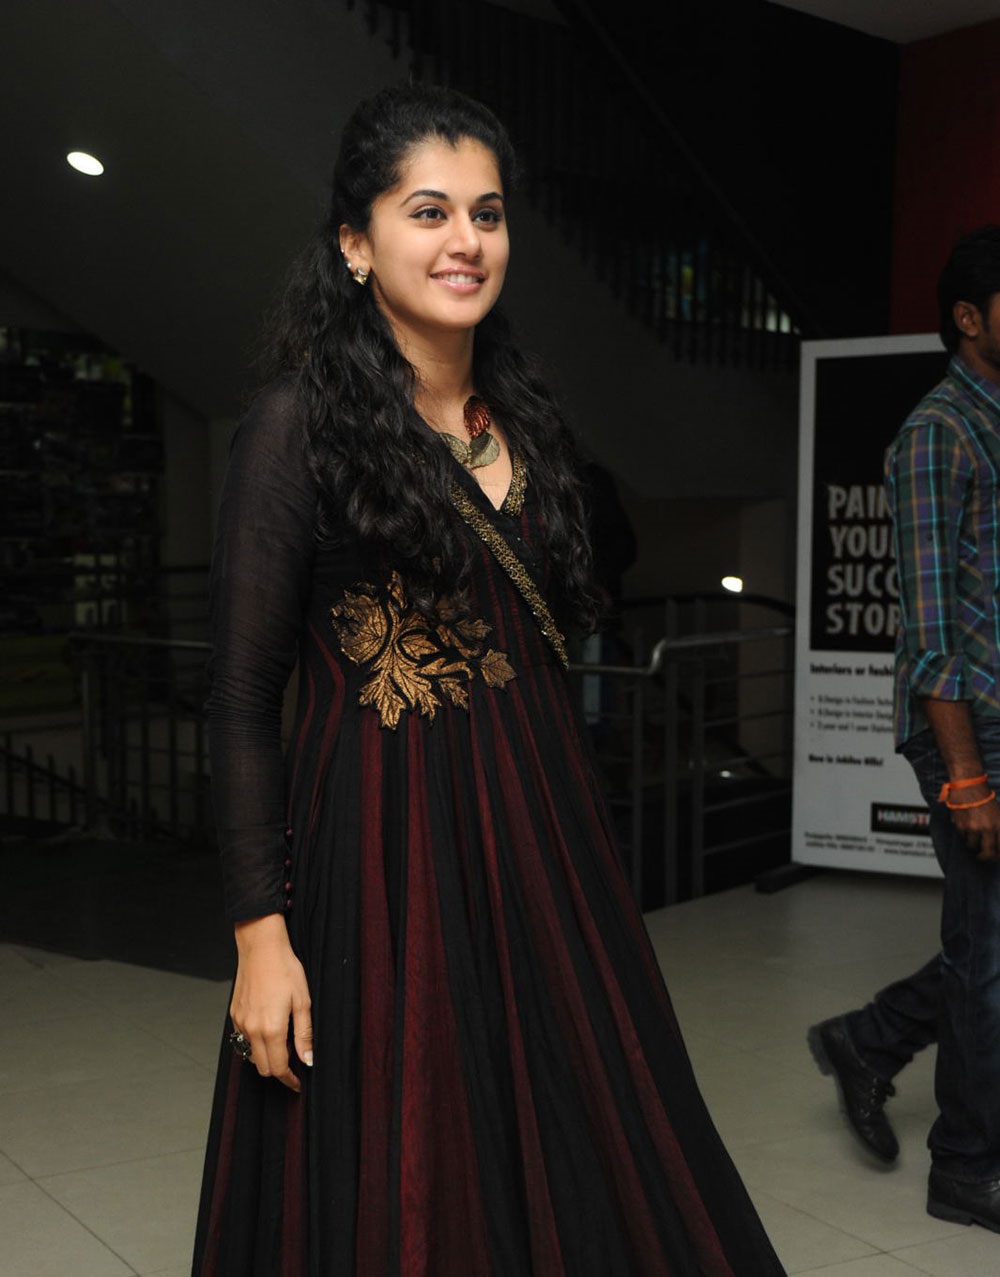 Glamorous Taapsee Pannu Smiling Photos In Maroon Dress